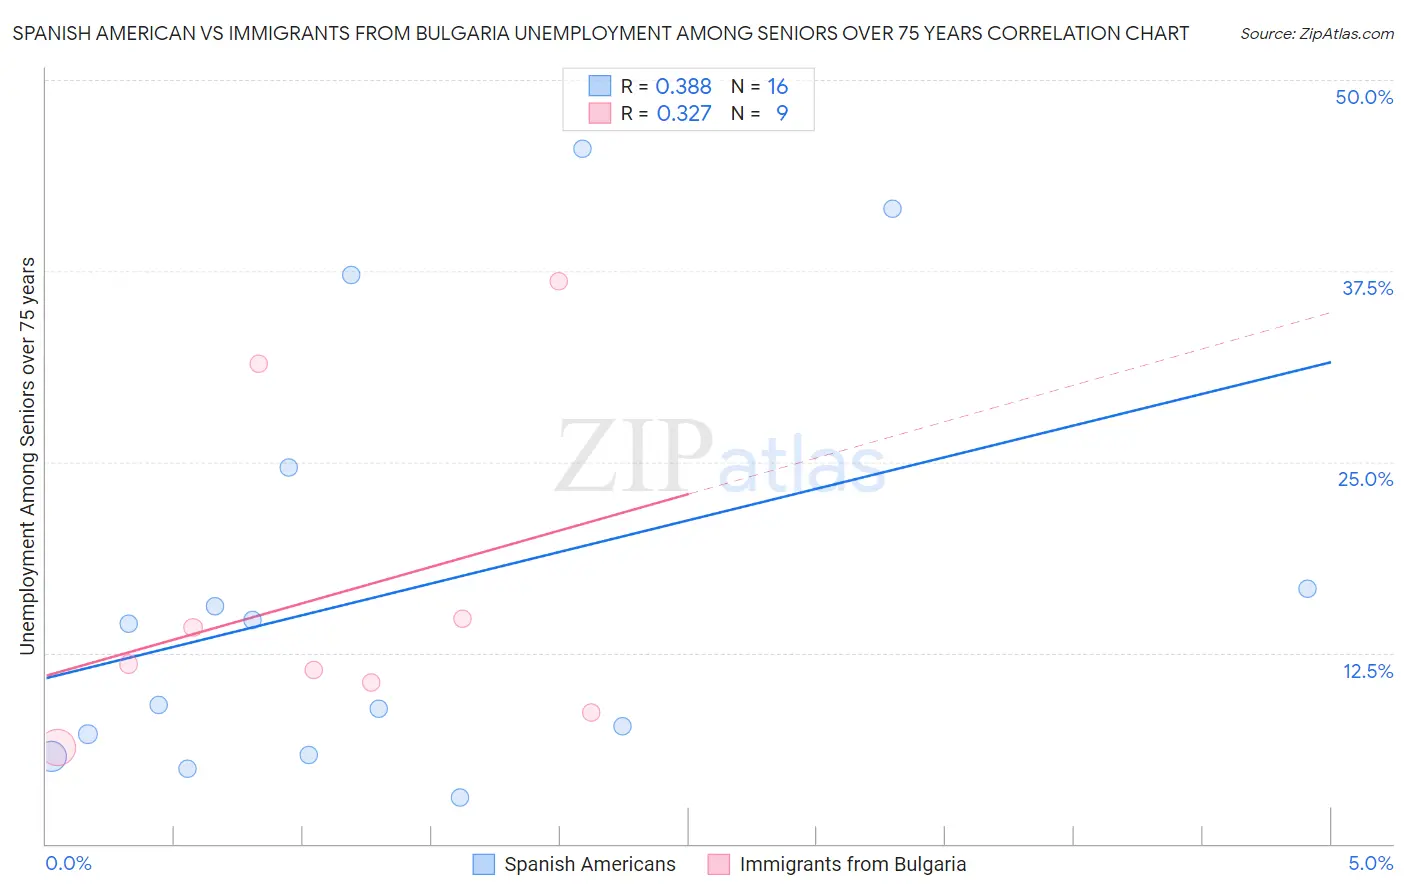 Spanish American vs Immigrants from Bulgaria Unemployment Among Seniors over 75 years